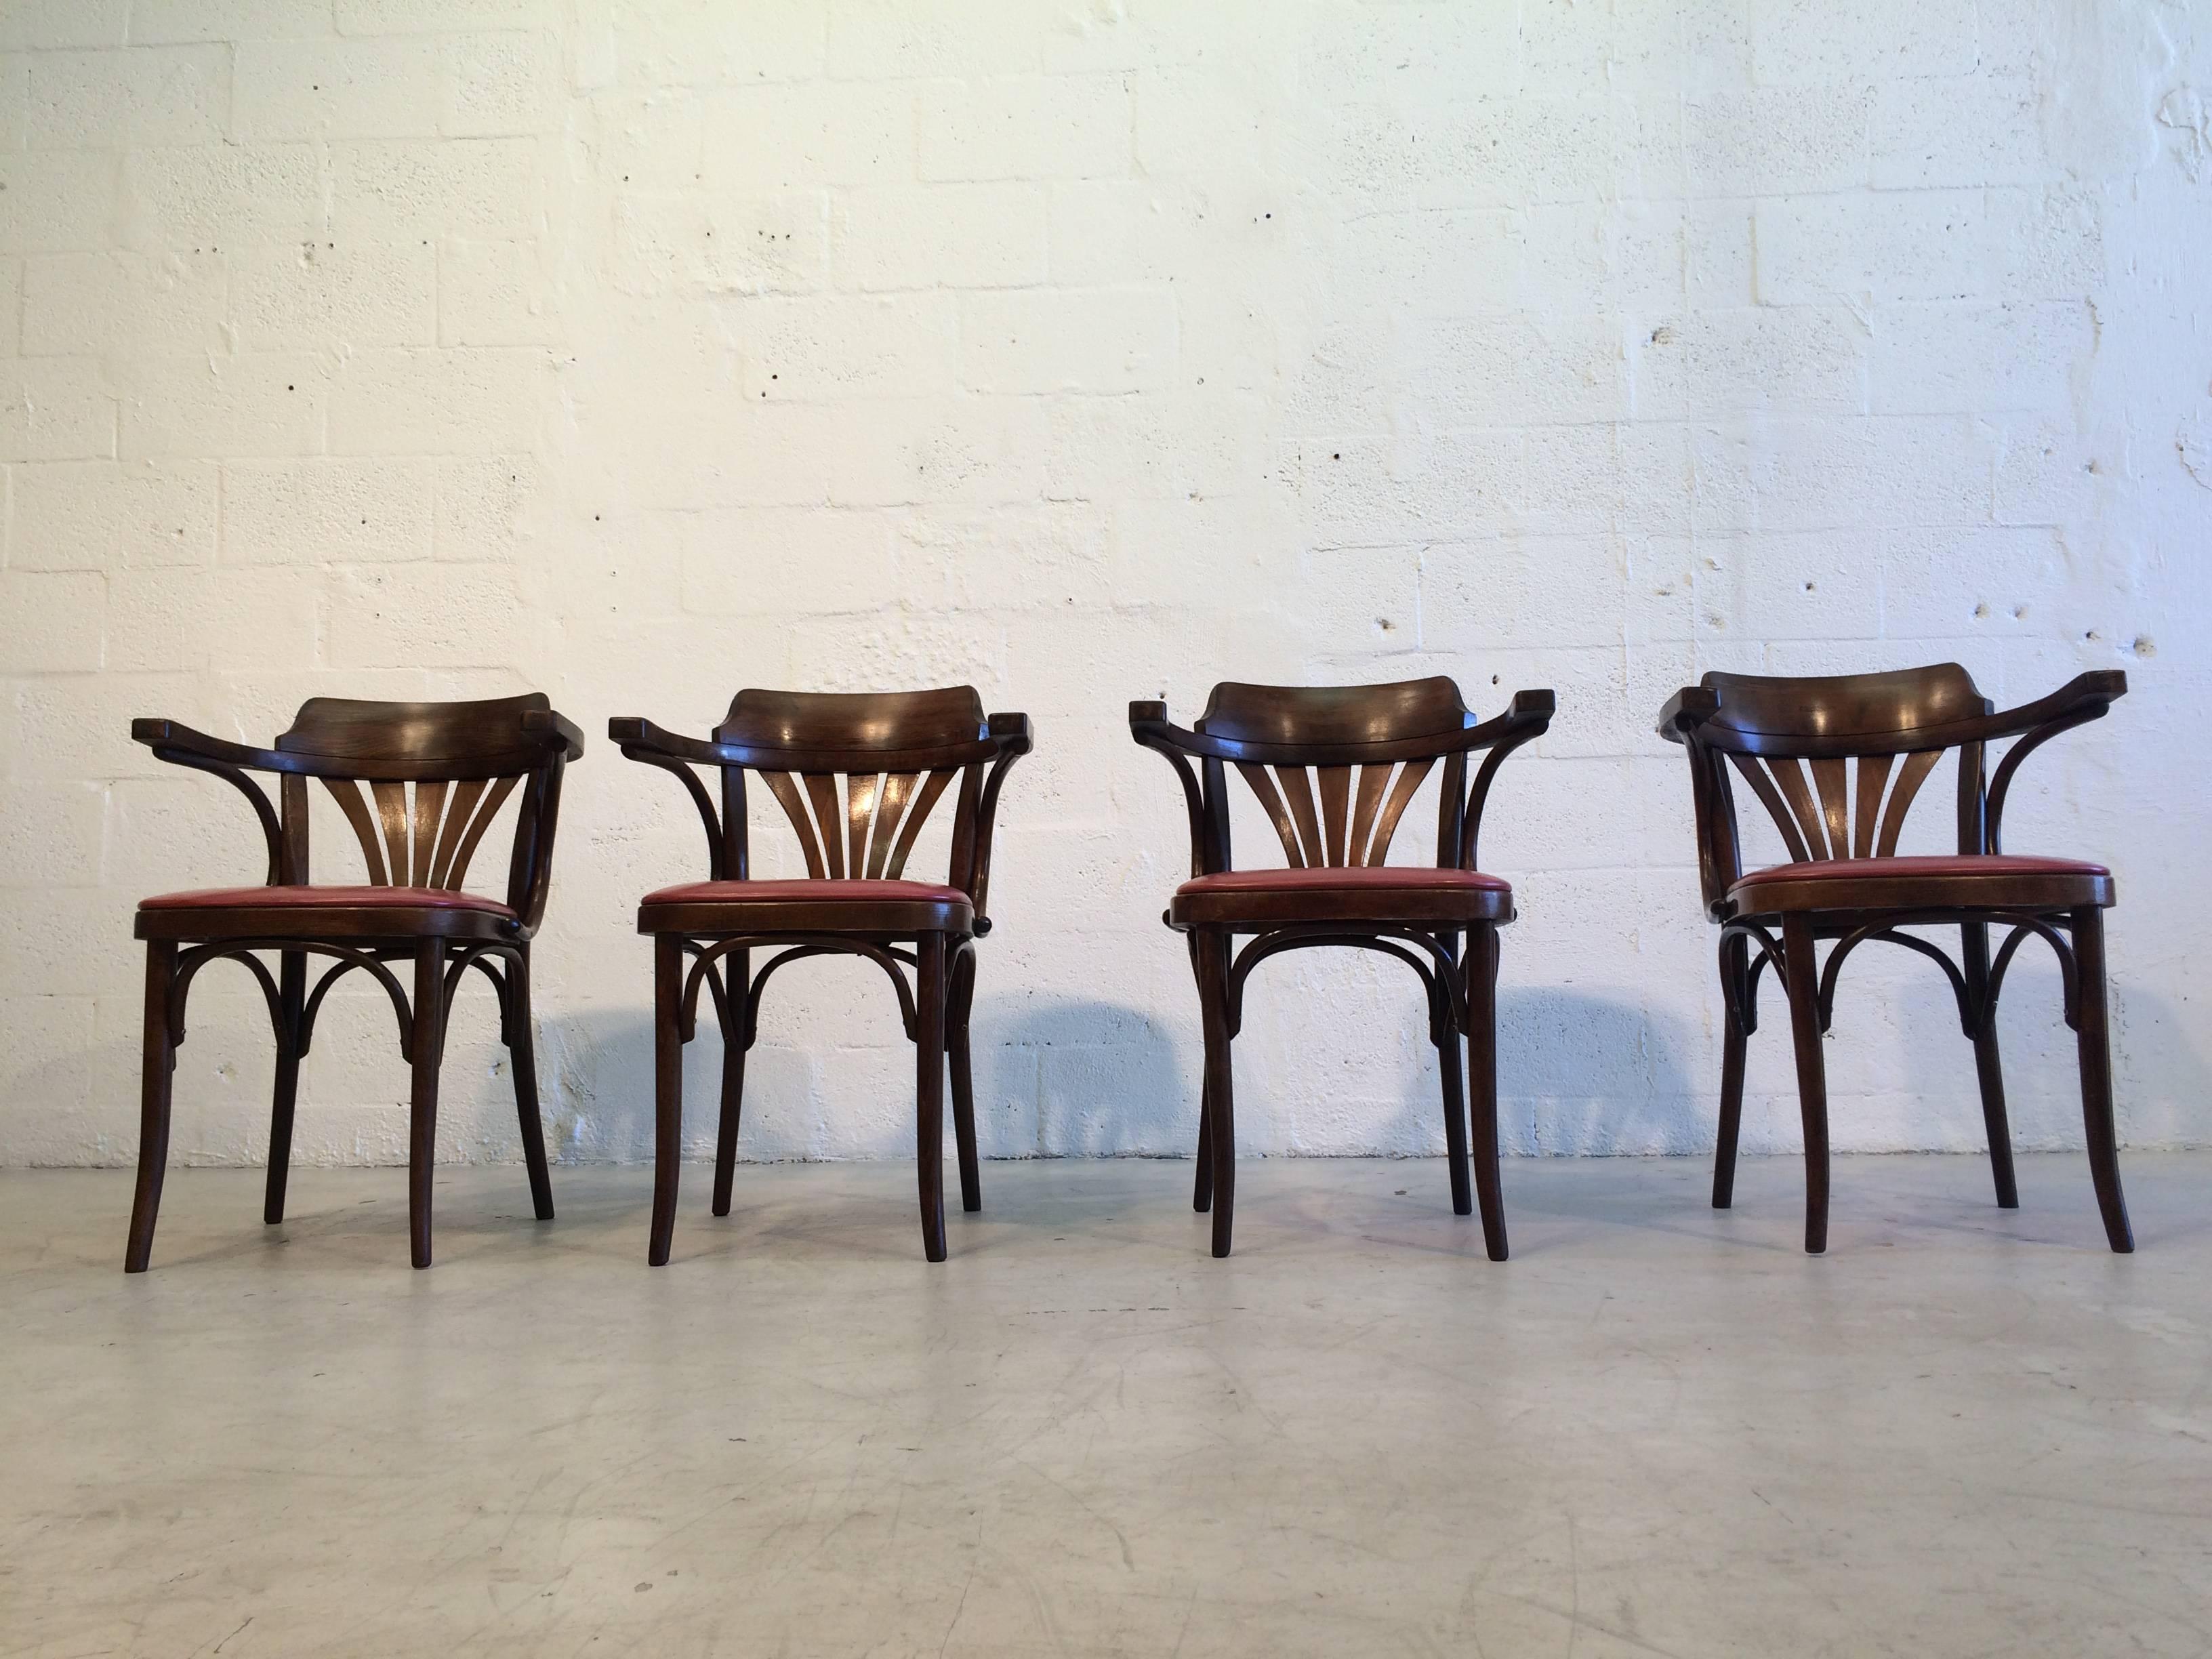 Six Bentwood Chairs by Drevounia, Czech Republic, 1950s, 12 Chairs Available 1